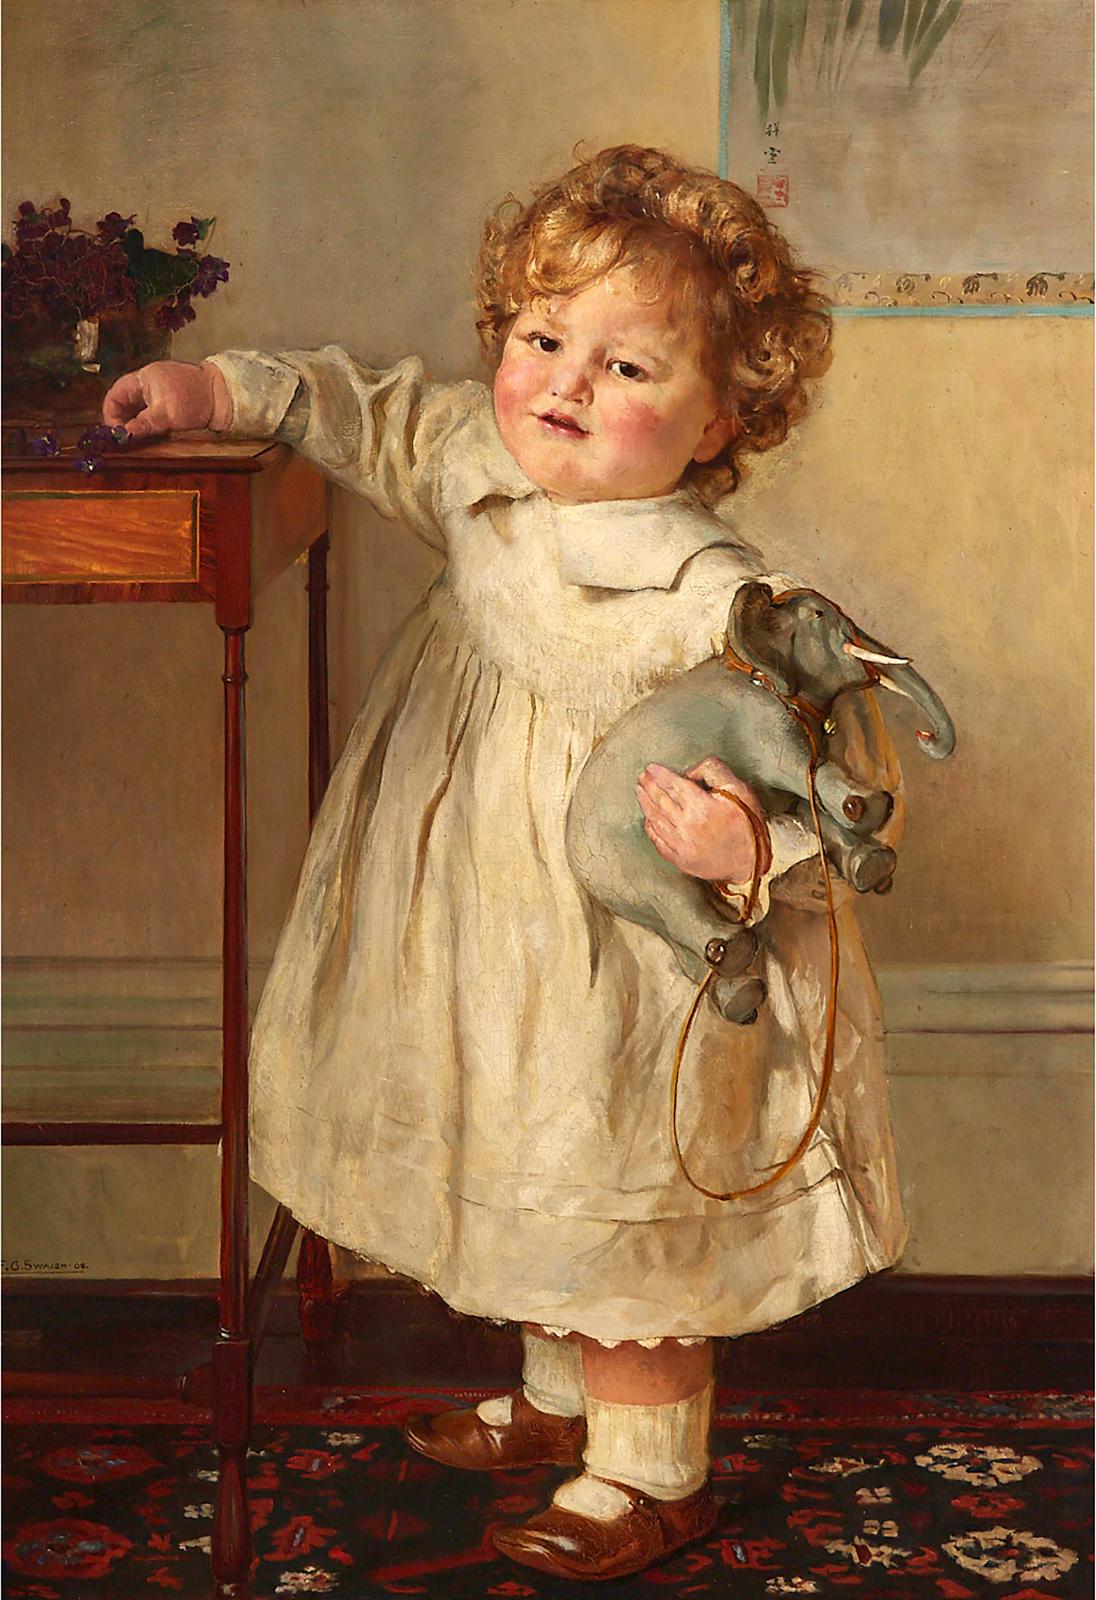 Frederick George Swaish (1879-1931) - Child With Pull Toy, 1906